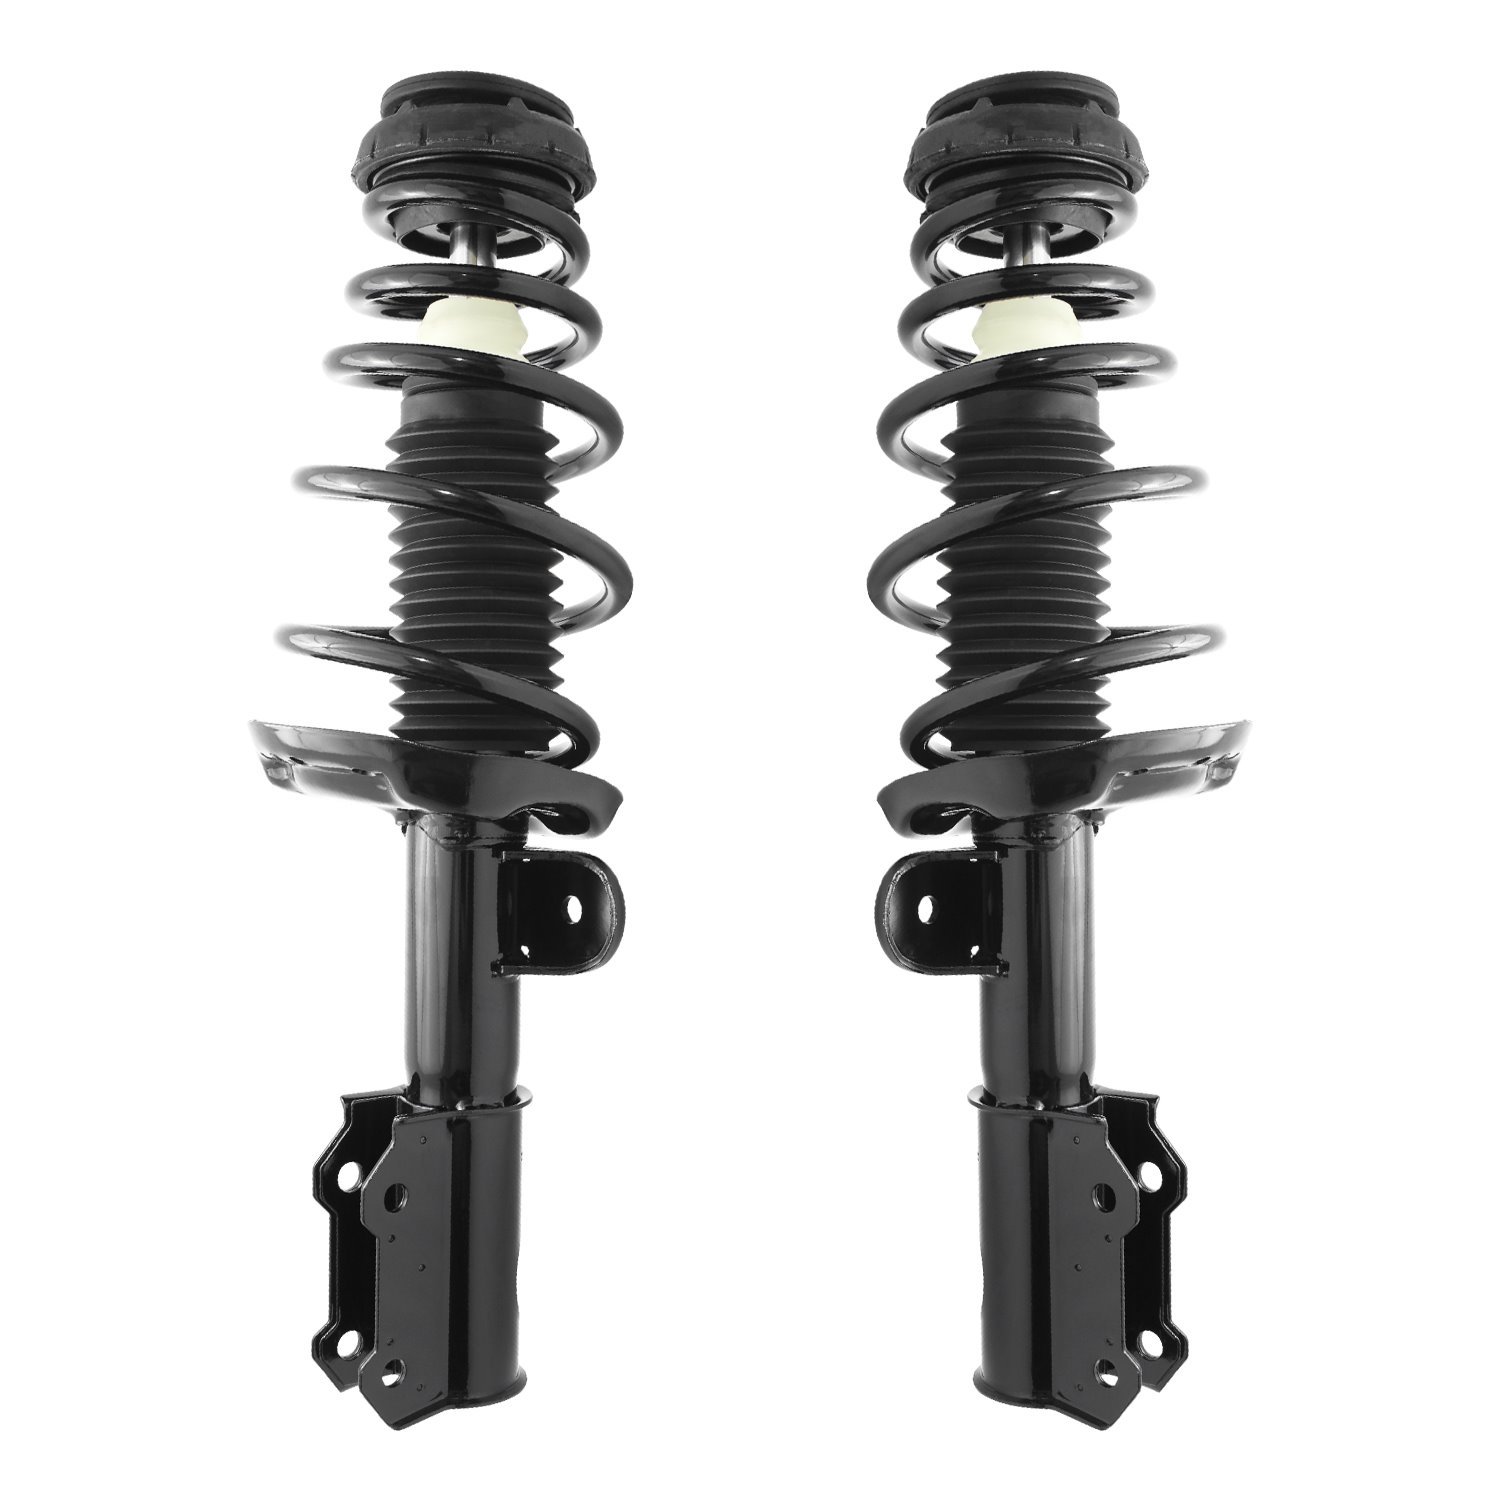 2-11885-11886-001 Suspension Strut & Coil Spring Assembly Set Fits Select Chevy Cruze